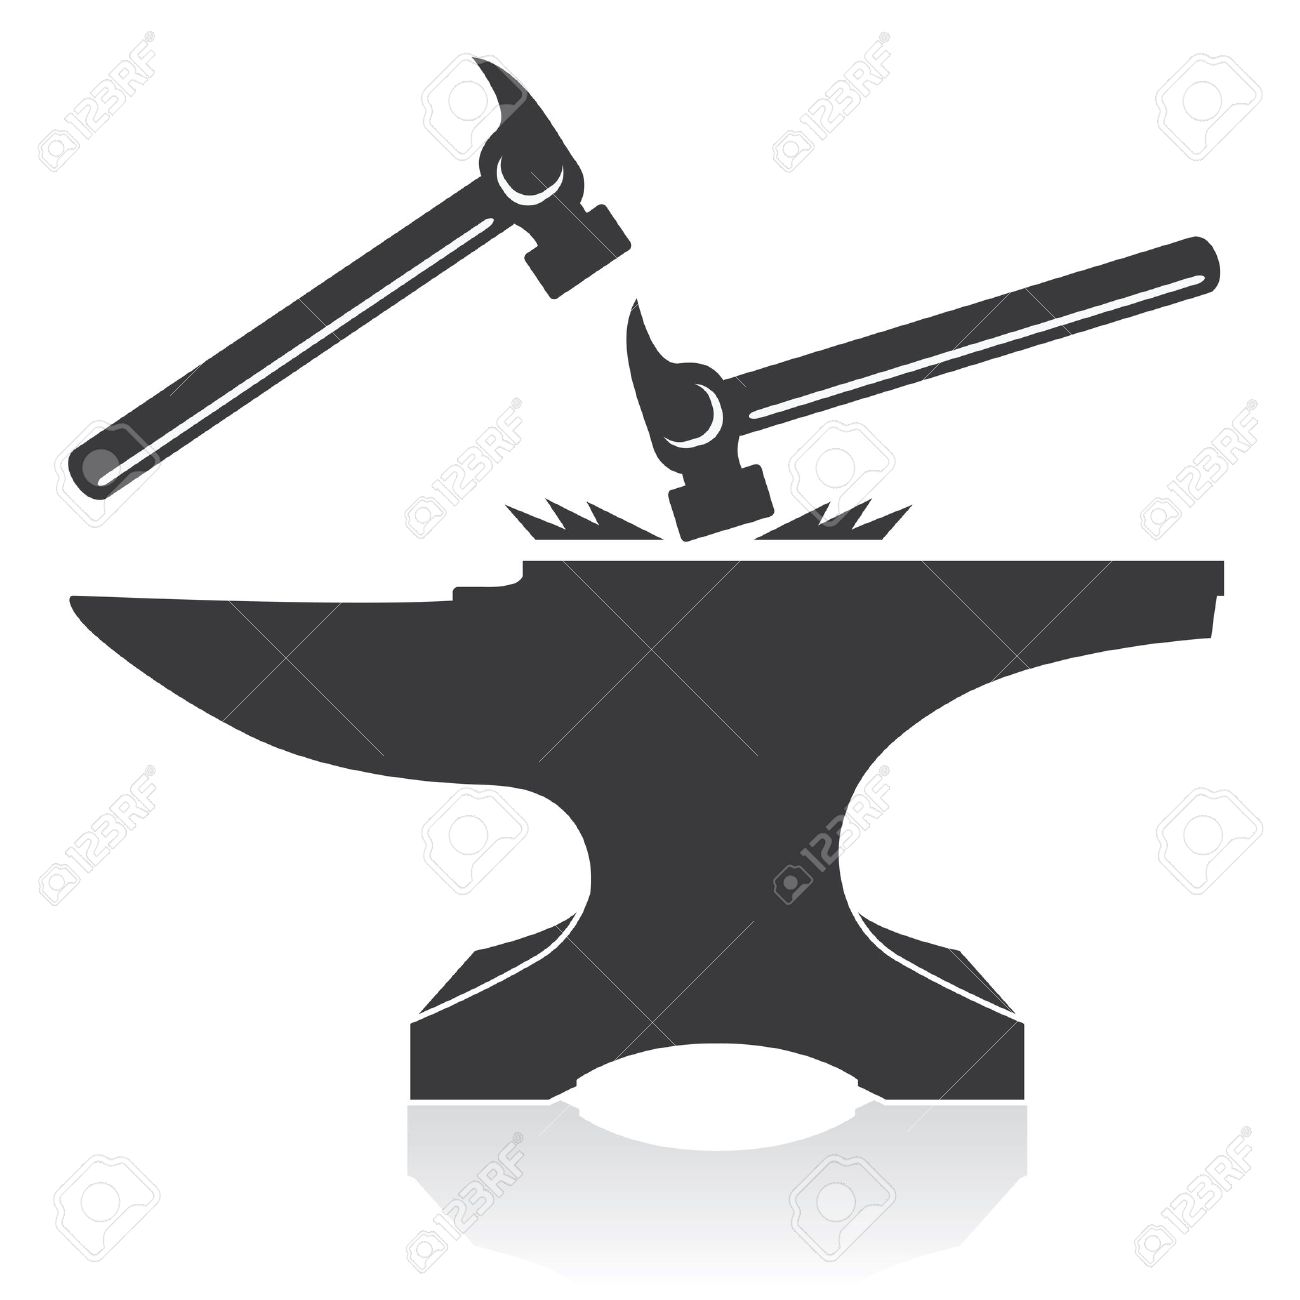 Anvil and hammer clipart.